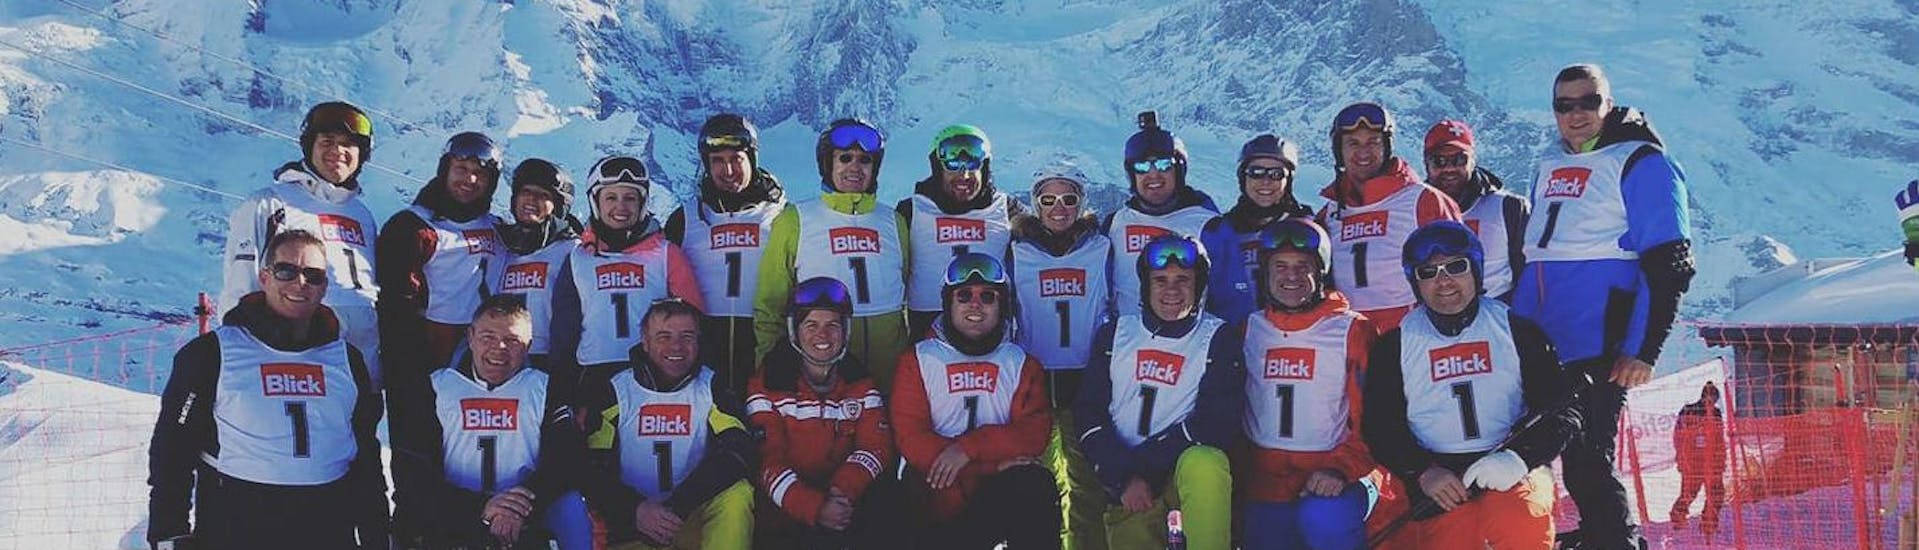 Adult Ski Lessons for Advanced Skiers with Swiss Ski School Wengen - Hero image